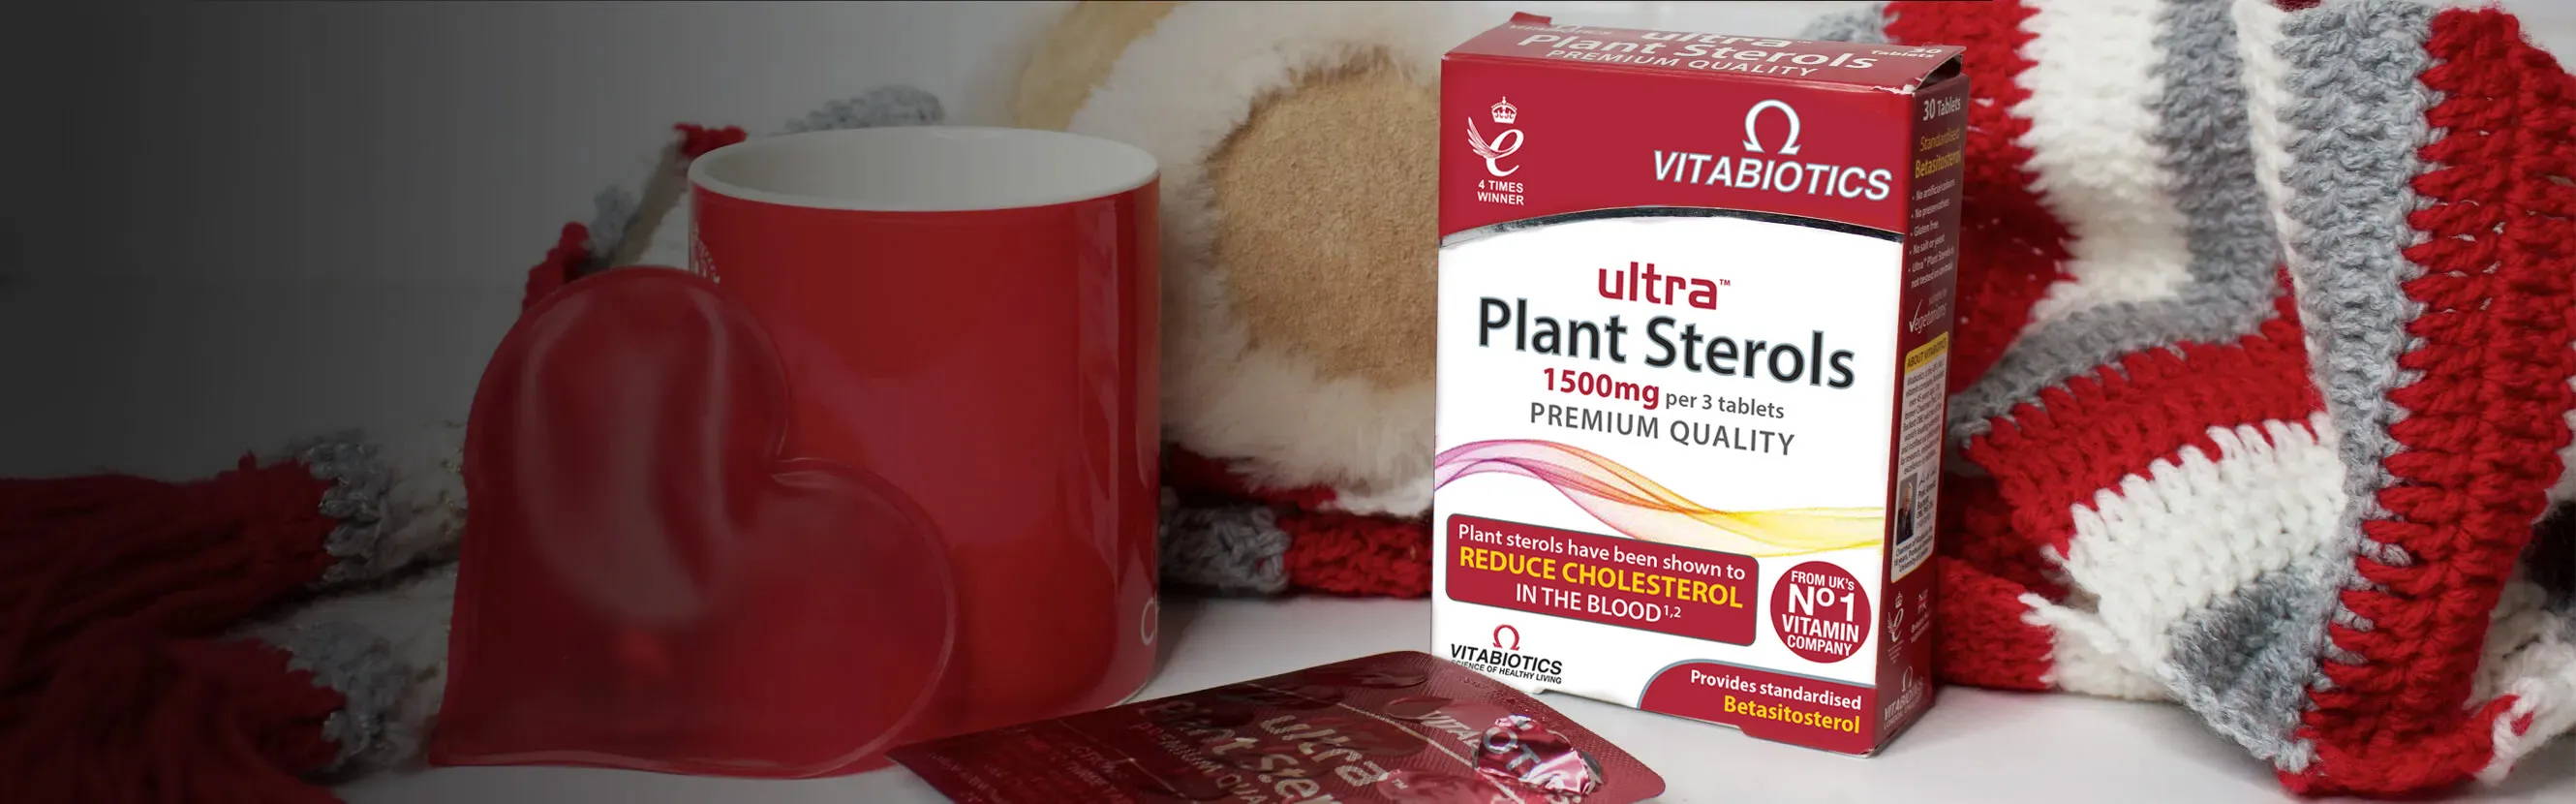  Ultra Plant Sterols Pack Next To A Red Mug 